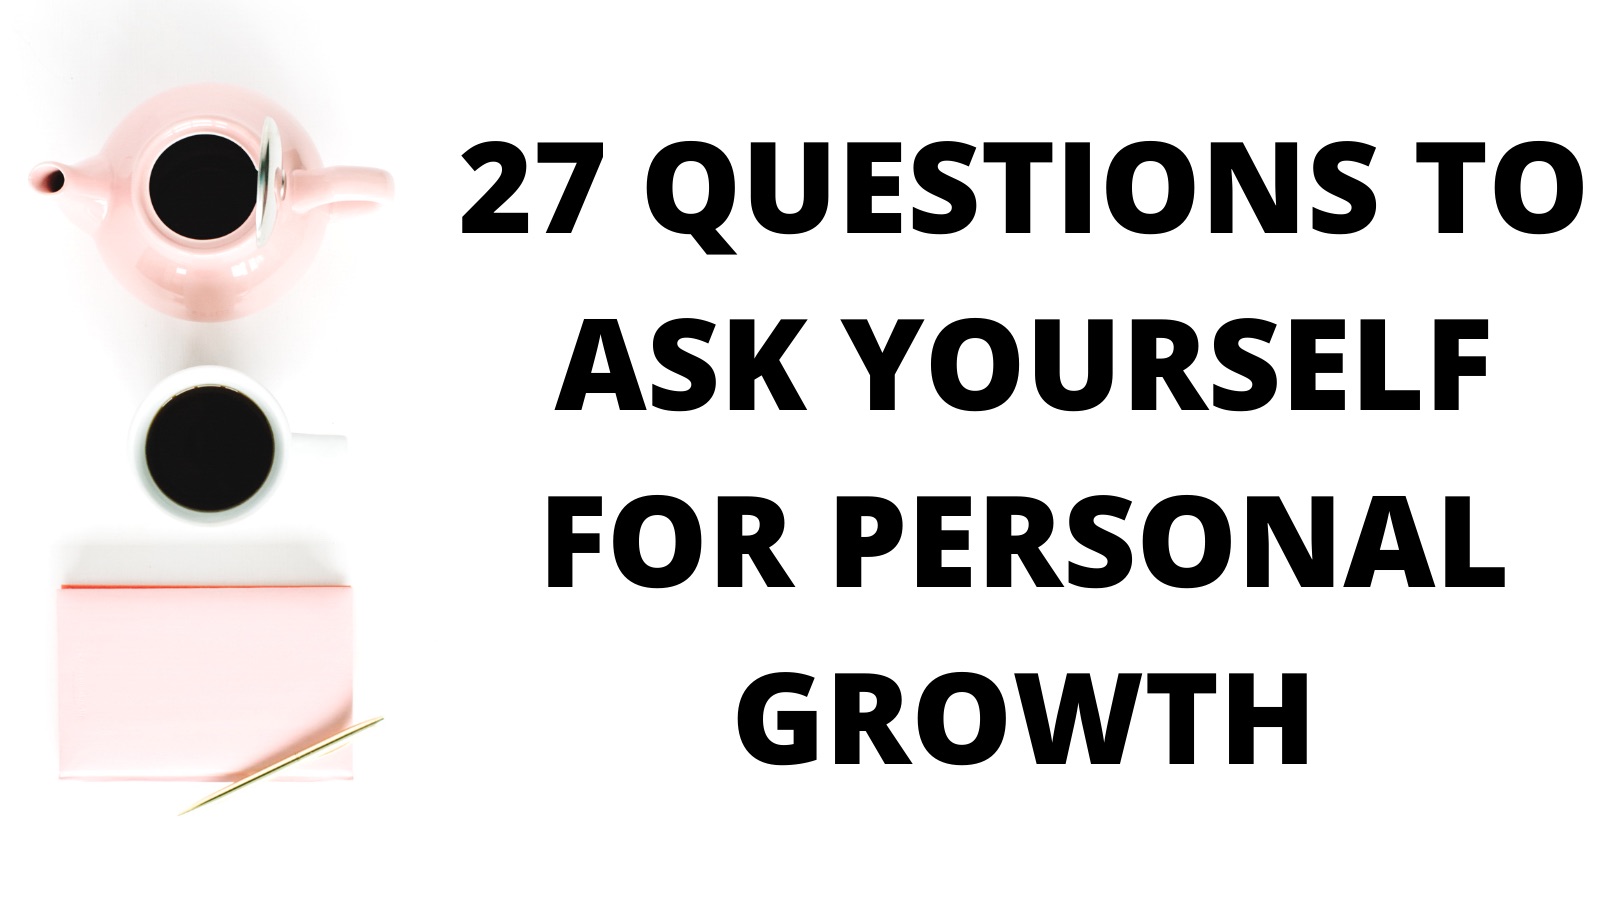 27 questions to ask yourself for personal growth!